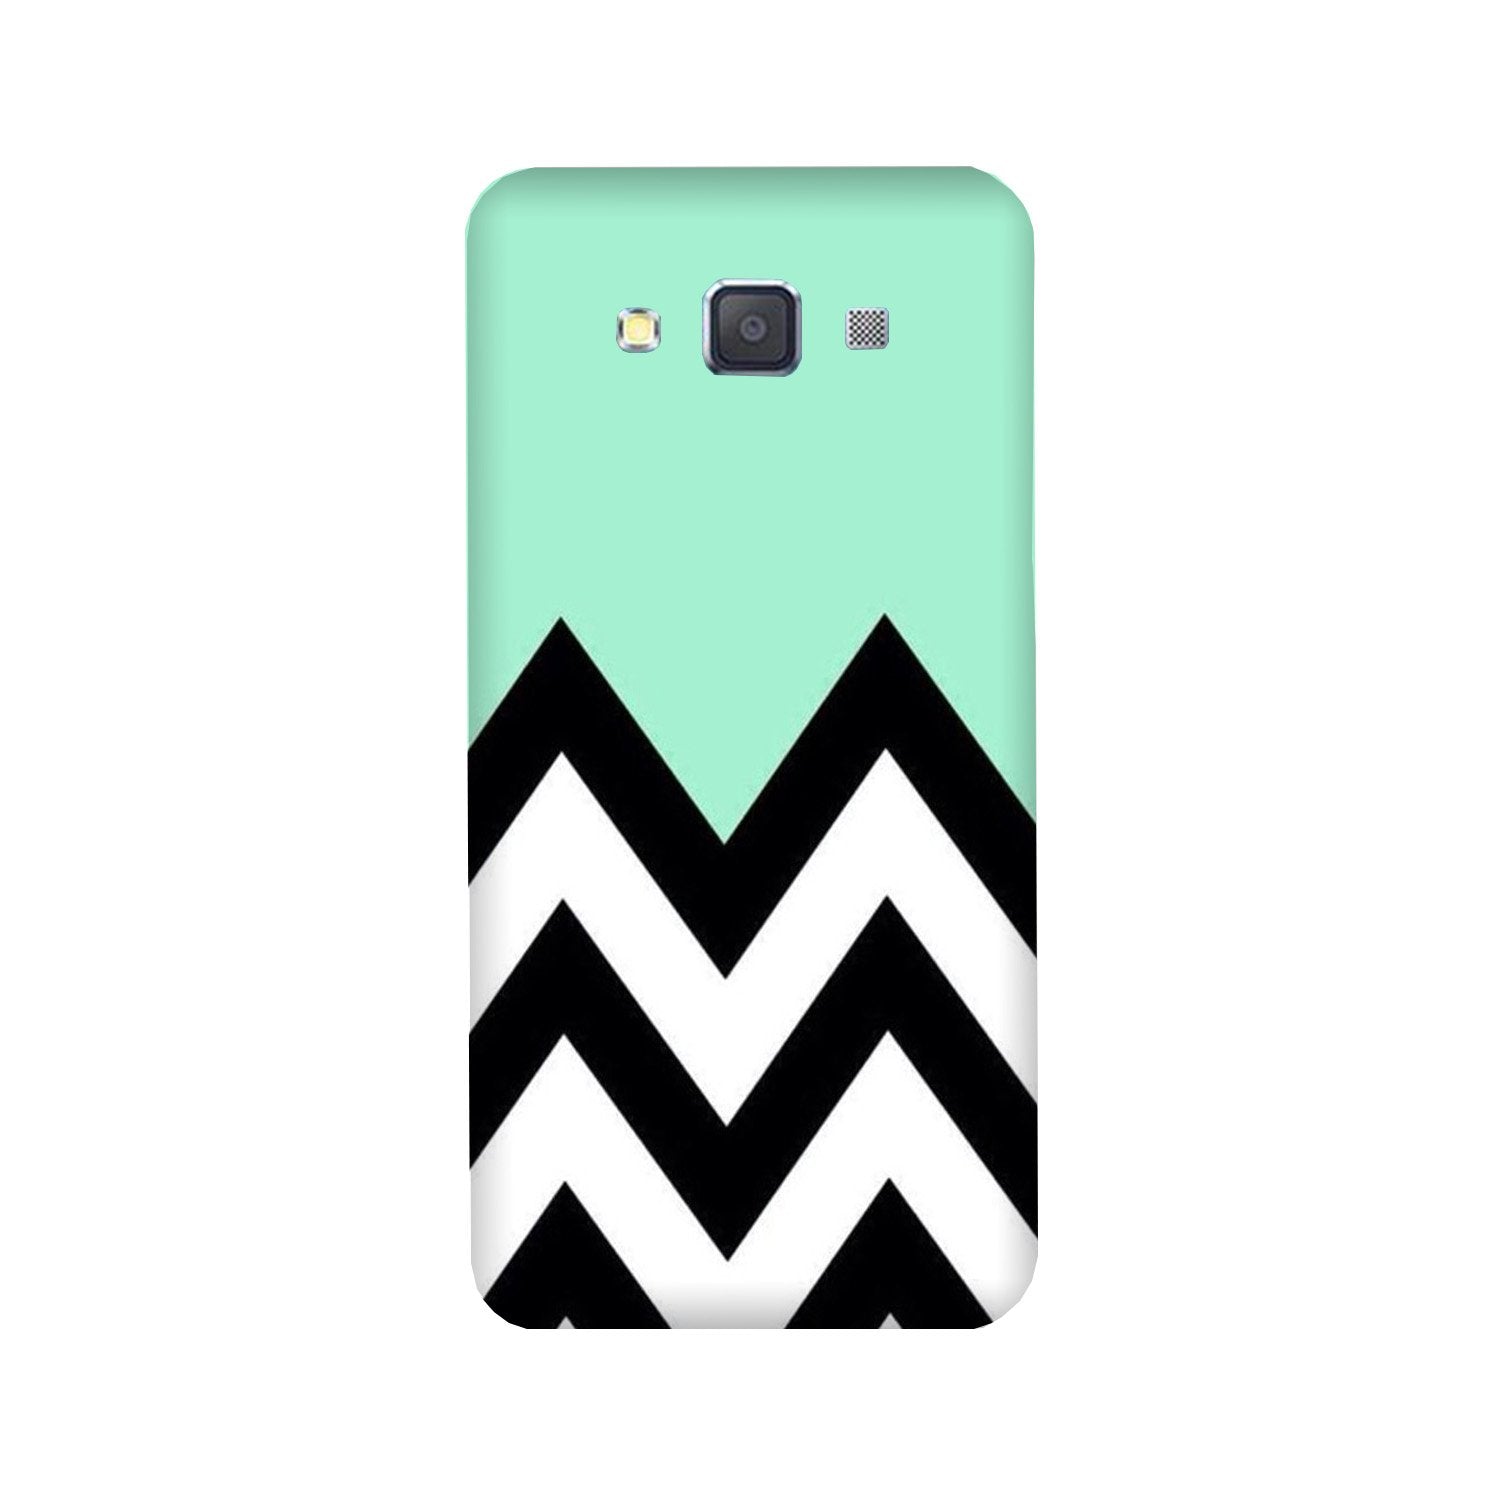 Pattern Case for Galaxy Grand Max